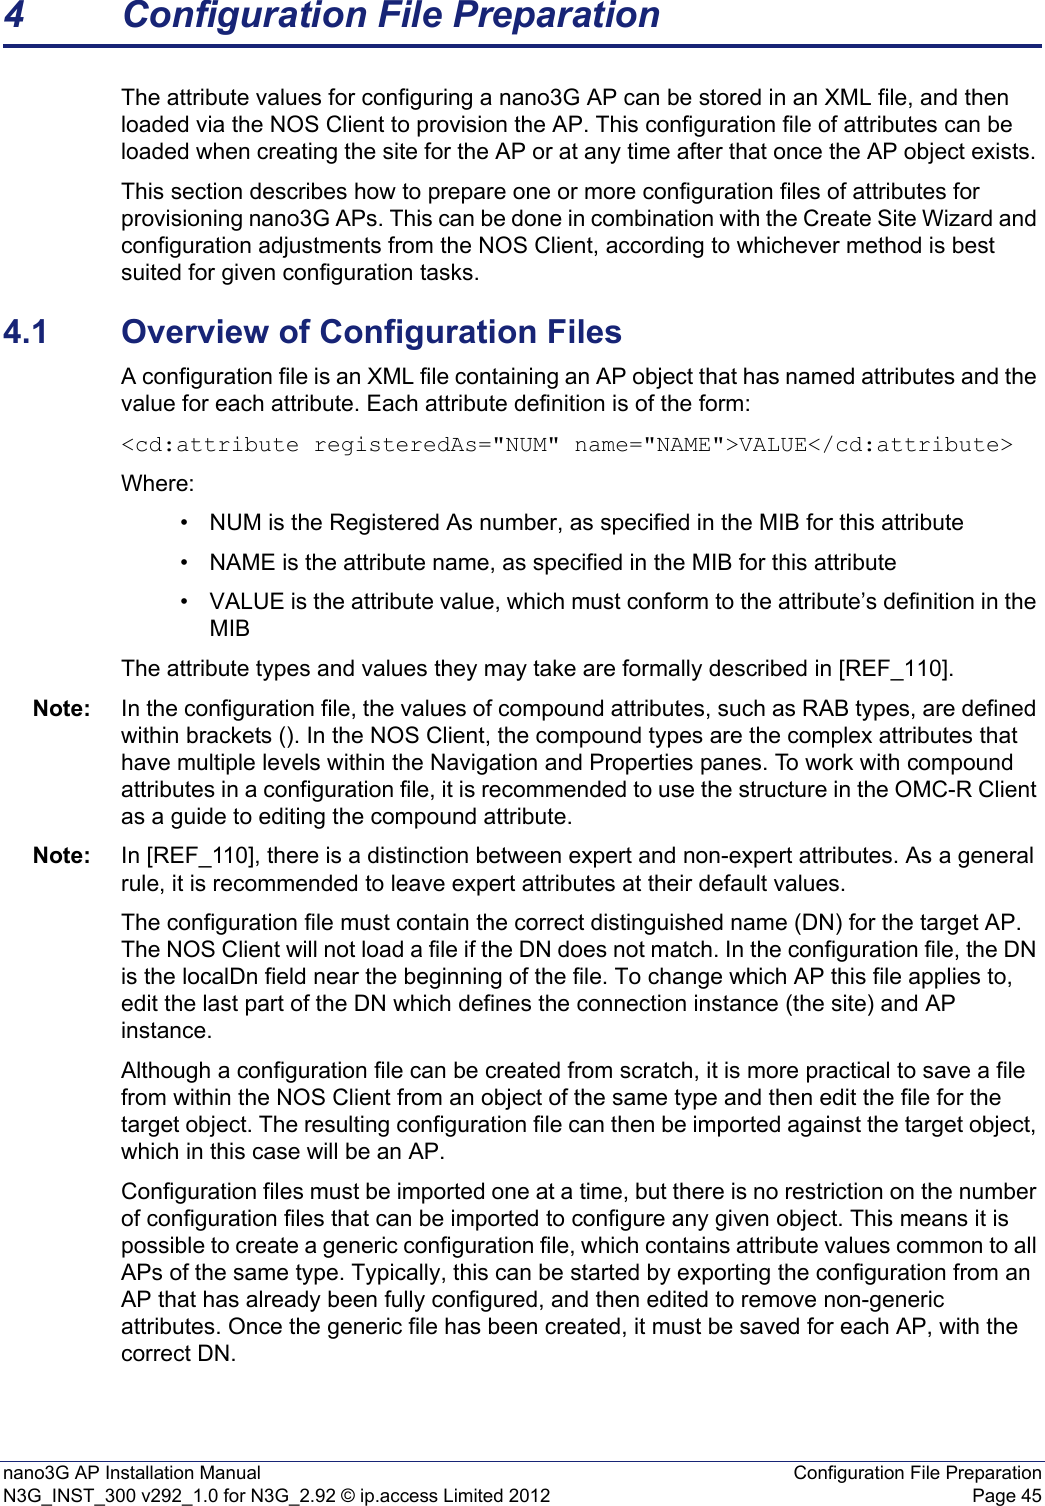 nano3G AP Installation Manual Configuration File PreparationN3G_INST_300 v292_1.0 for N3G_2.92 © ip.access Limited 2012 Page 454 Configuration File PreparationThe attribute values for configuring a nano3G AP can be stored in an XML file, and then loaded via the NOS Client to provision the AP. This configuration file of attributes can be loaded when creating the site for the AP or at any time after that once the AP object exists. This section describes how to prepare one or more configuration files of attributes for provisioning nano3G APs. This can be done in combination with the Create Site Wizard and configuration adjustments from the NOS Client, according to whichever method is best suited for given configuration tasks. 4.1 Overview of Configuration FilesA configuration file is an XML file containing an AP object that has named attributes and the value for each attribute. Each attribute definition is of the form:&lt;cd:attribute registeredAs=&quot;NUM&quot; name=&quot;NAME&quot;&gt;VALUE&lt;/cd:attribute&gt;Where:• NUM is the Registered As number, as specified in the MIB for this attribute• NAME is the attribute name, as specified in the MIB for this attribute• VALUE is the attribute value, which must conform to the attribute’s definition in the MIBThe attribute types and values they may take are formally described in [REF_110]. Note: In the configuration file, the values of compound attributes, such as RAB types, are defined within brackets (). In the NOS Client, the compound types are the complex attributes that have multiple levels within the Navigation and Properties panes. To work with compound attributes in a configuration file, it is recommended to use the structure in the OMC-R Client as a guide to editing the compound attribute.Note: In [REF_110], there is a distinction between expert and non-expert attributes. As a general rule, it is recommended to leave expert attributes at their default values. The configuration file must contain the correct distinguished name (DN) for the target AP. The NOS Client will not load a file if the DN does not match. In the configuration file, the DN is the localDn field near the beginning of the file. To change which AP this file applies to, edit the last part of the DN which defines the connection instance (the site) and AP instance.Although a configuration file can be created from scratch, it is more practical to save a file from within the NOS Client from an object of the same type and then edit the file for the target object. The resulting configuration file can then be imported against the target object, which in this case will be an AP.Configuration files must be imported one at a time, but there is no restriction on the number of configuration files that can be imported to configure any given object. This means it is possible to create a generic configuration file, which contains attribute values common to all APs of the same type. Typically, this can be started by exporting the configuration from an AP that has already been fully configured, and then edited to remove non-generic attributes. Once the generic file has been created, it must be saved for each AP, with the correct DN.